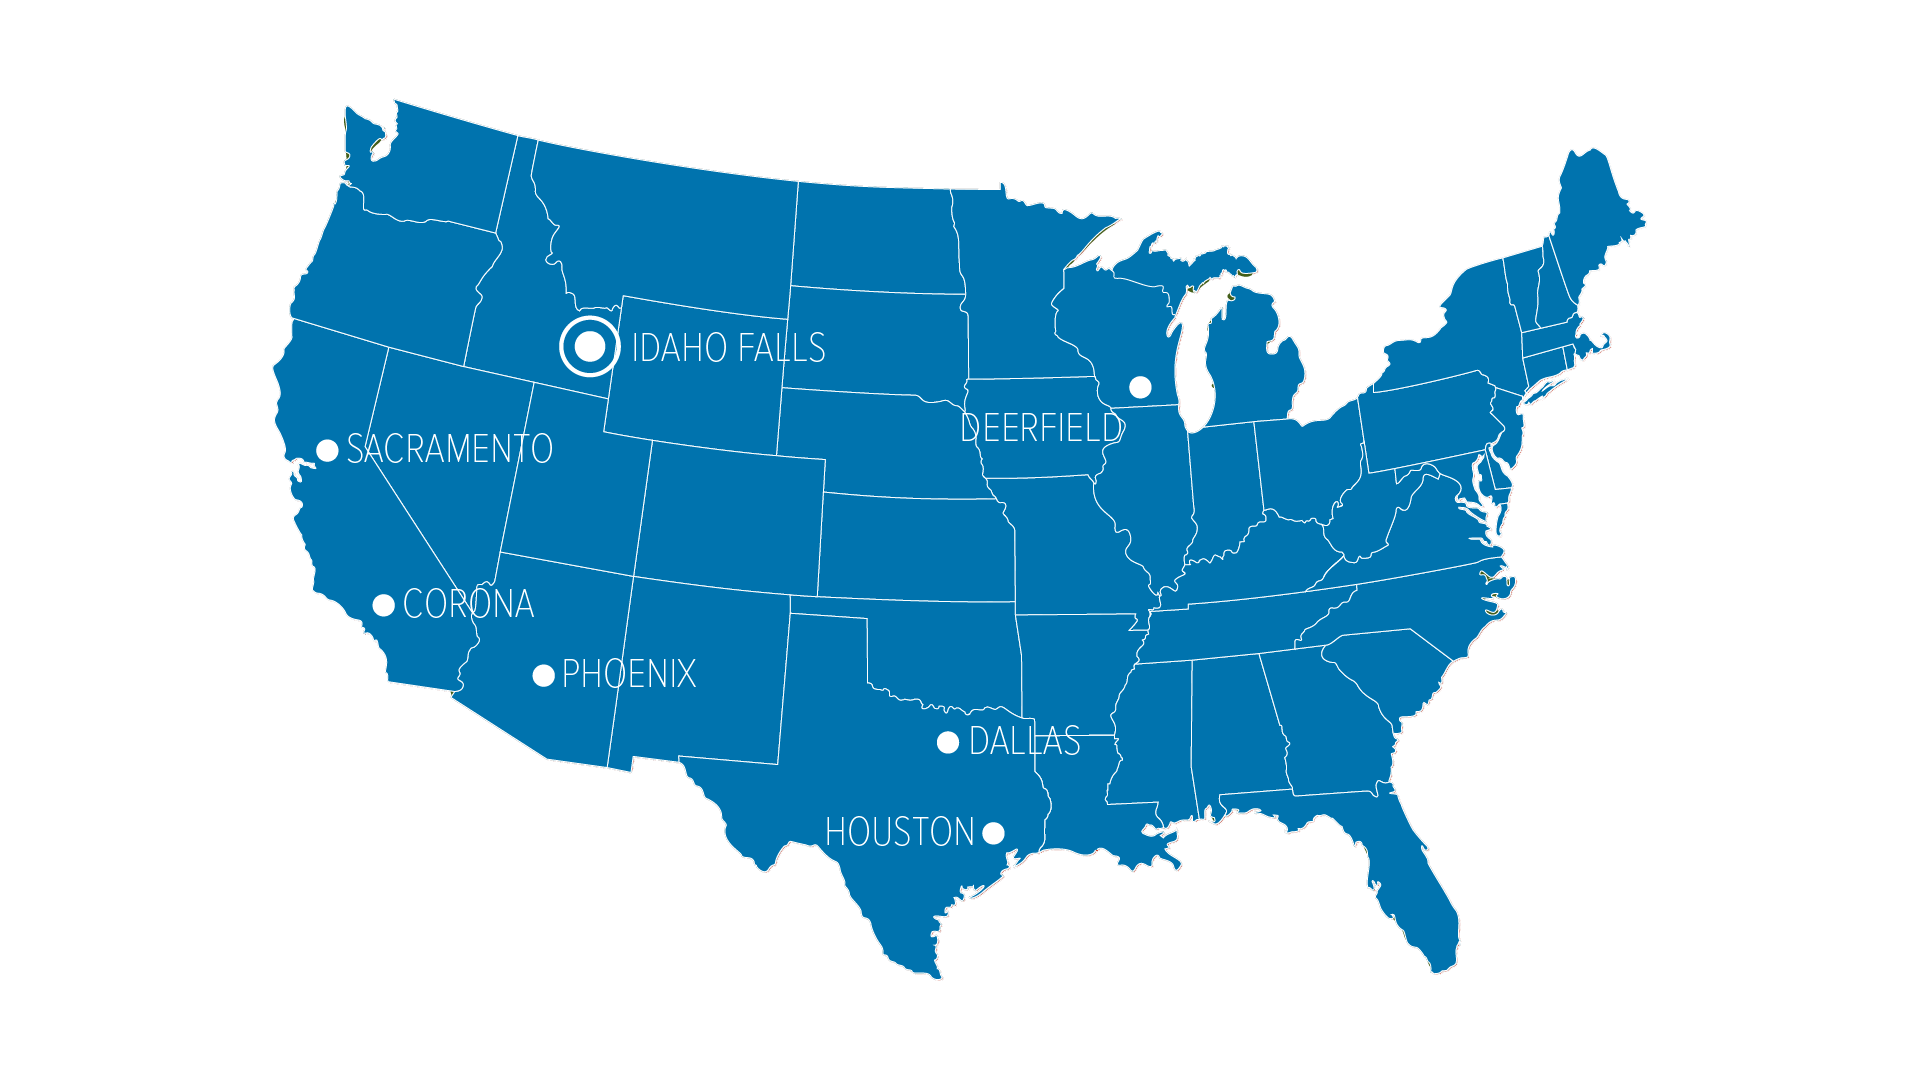 United States map showing RingCentral coverage